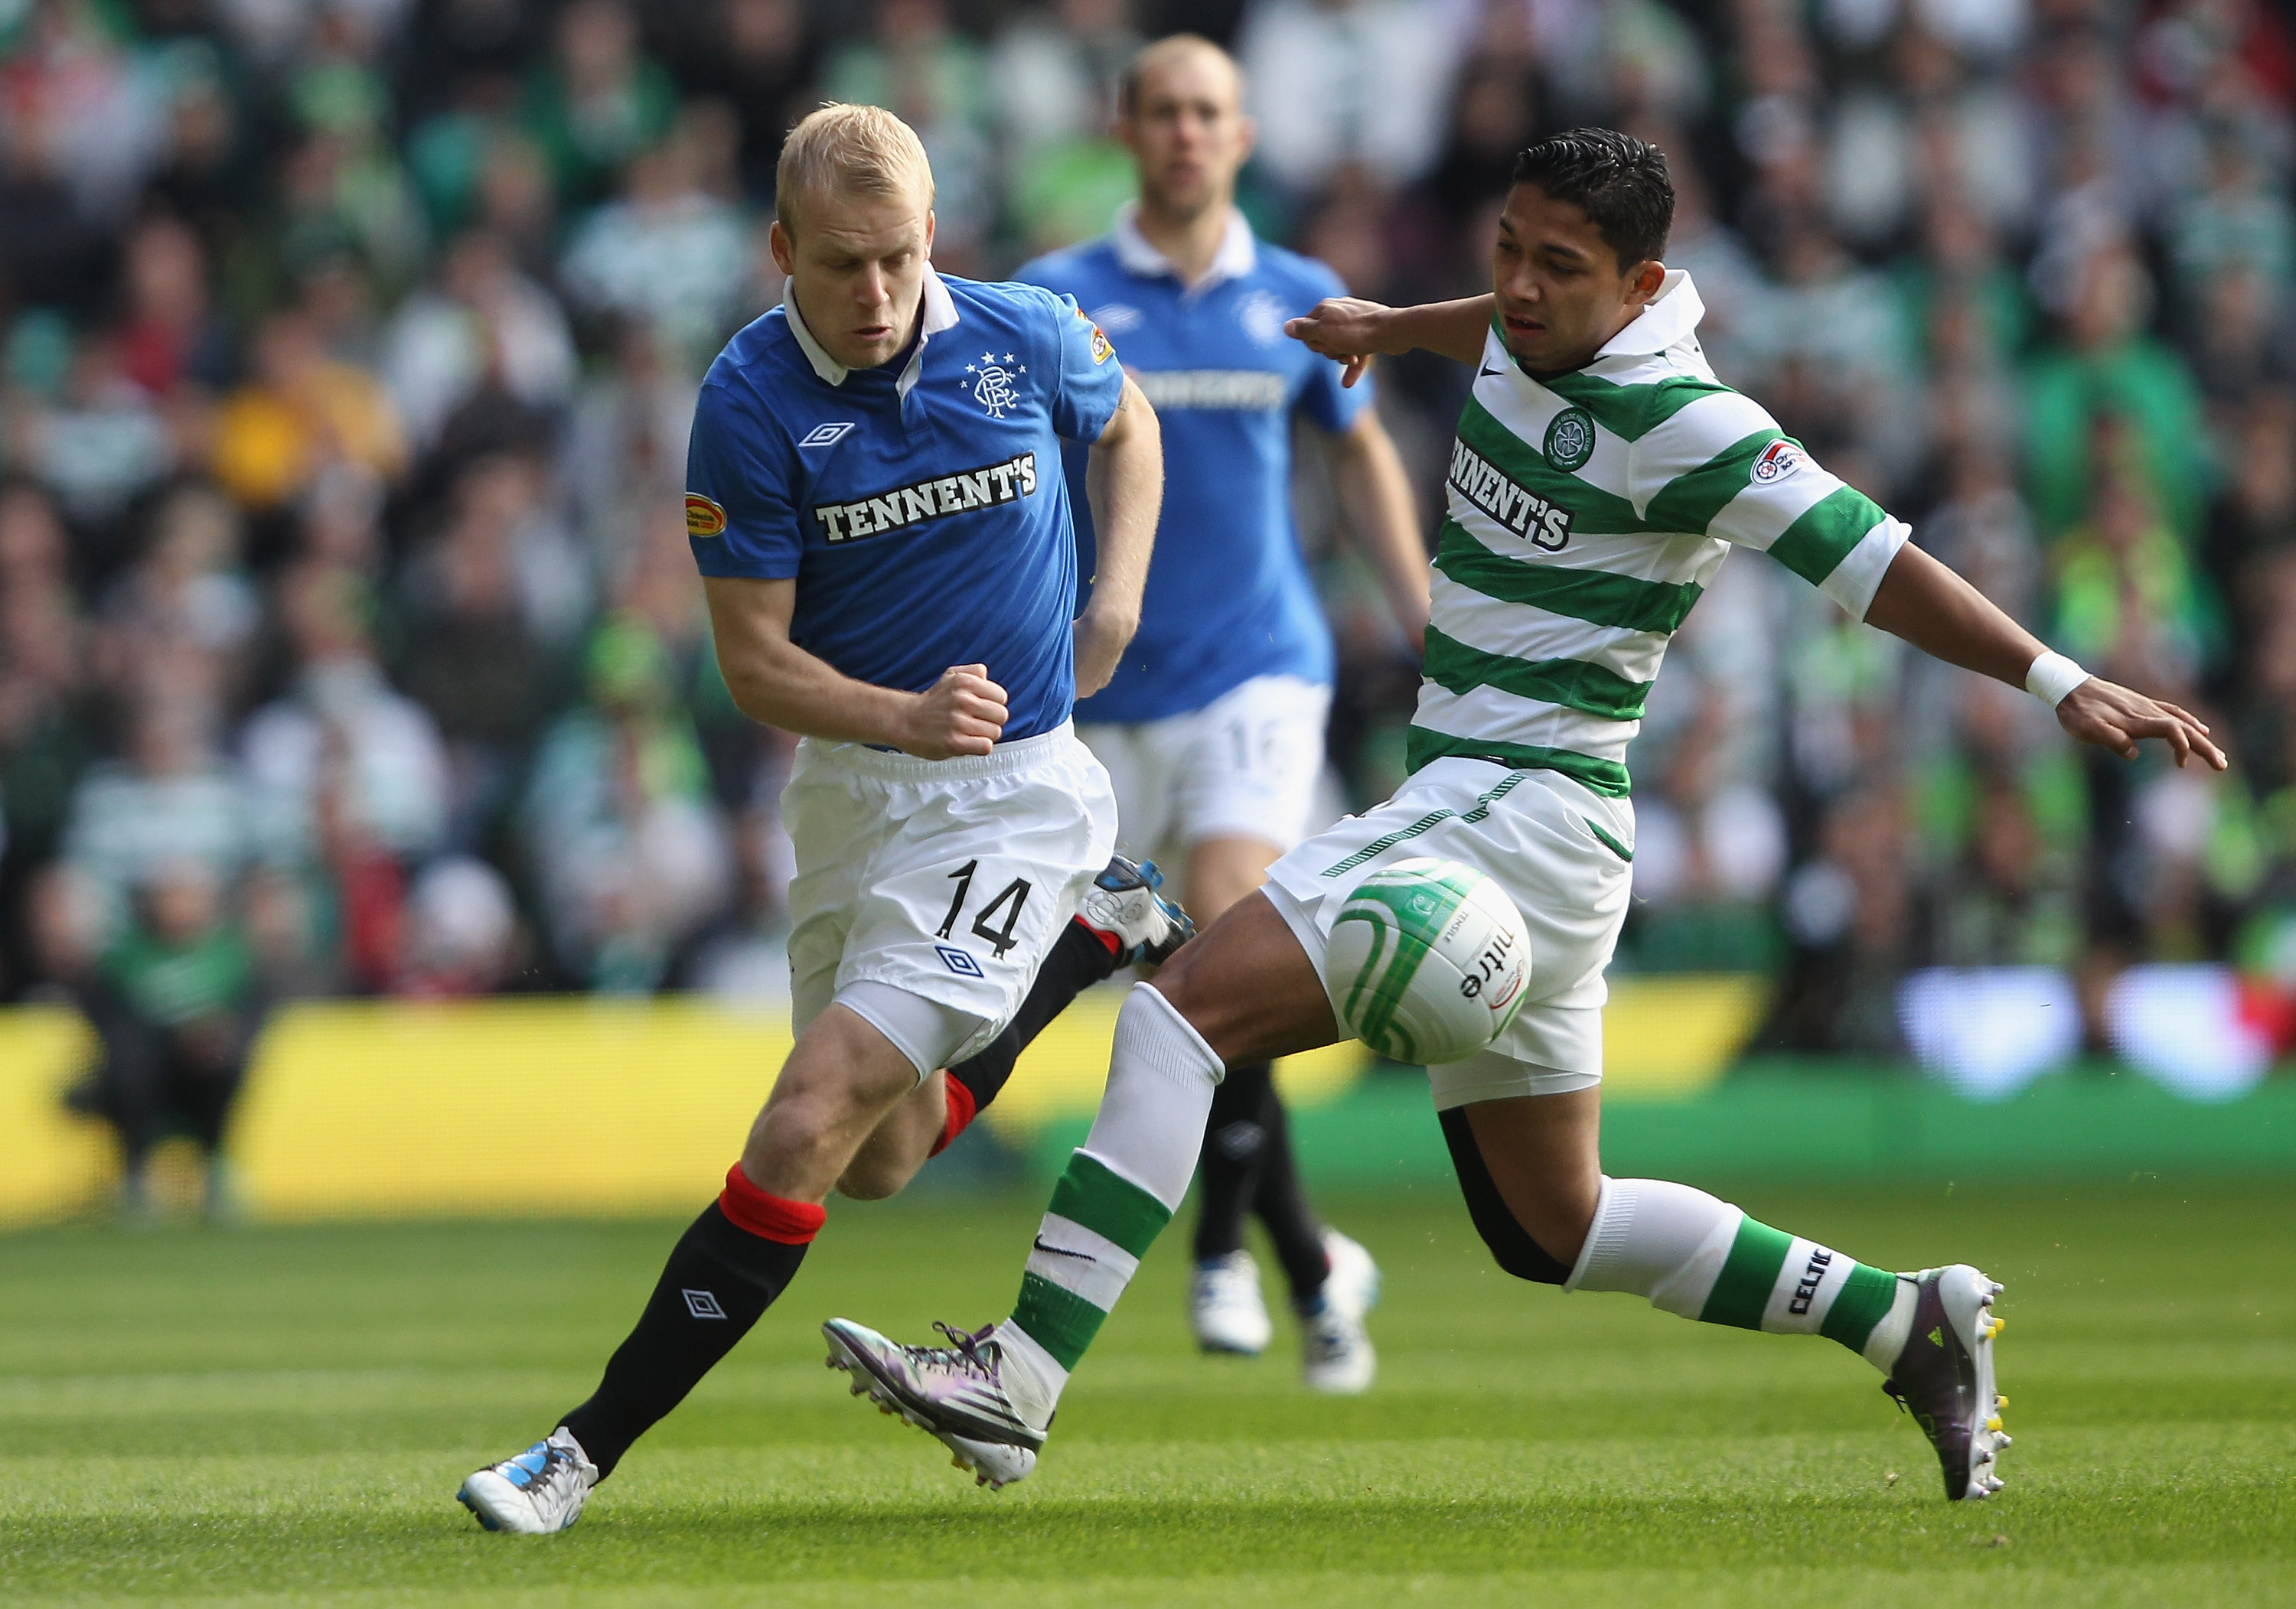 GLASGOW, SCOTLAND - OCTOBER 24: Steven Naismith of Rangers is tackled by Emilio Izaguirre of Celtic during the Clydesdale Bank Premier League match between Celtic and Rangers at Celtic Park on October 24, 2010 in Glasgow, Scotland.  (Photo by Clive Brunsk